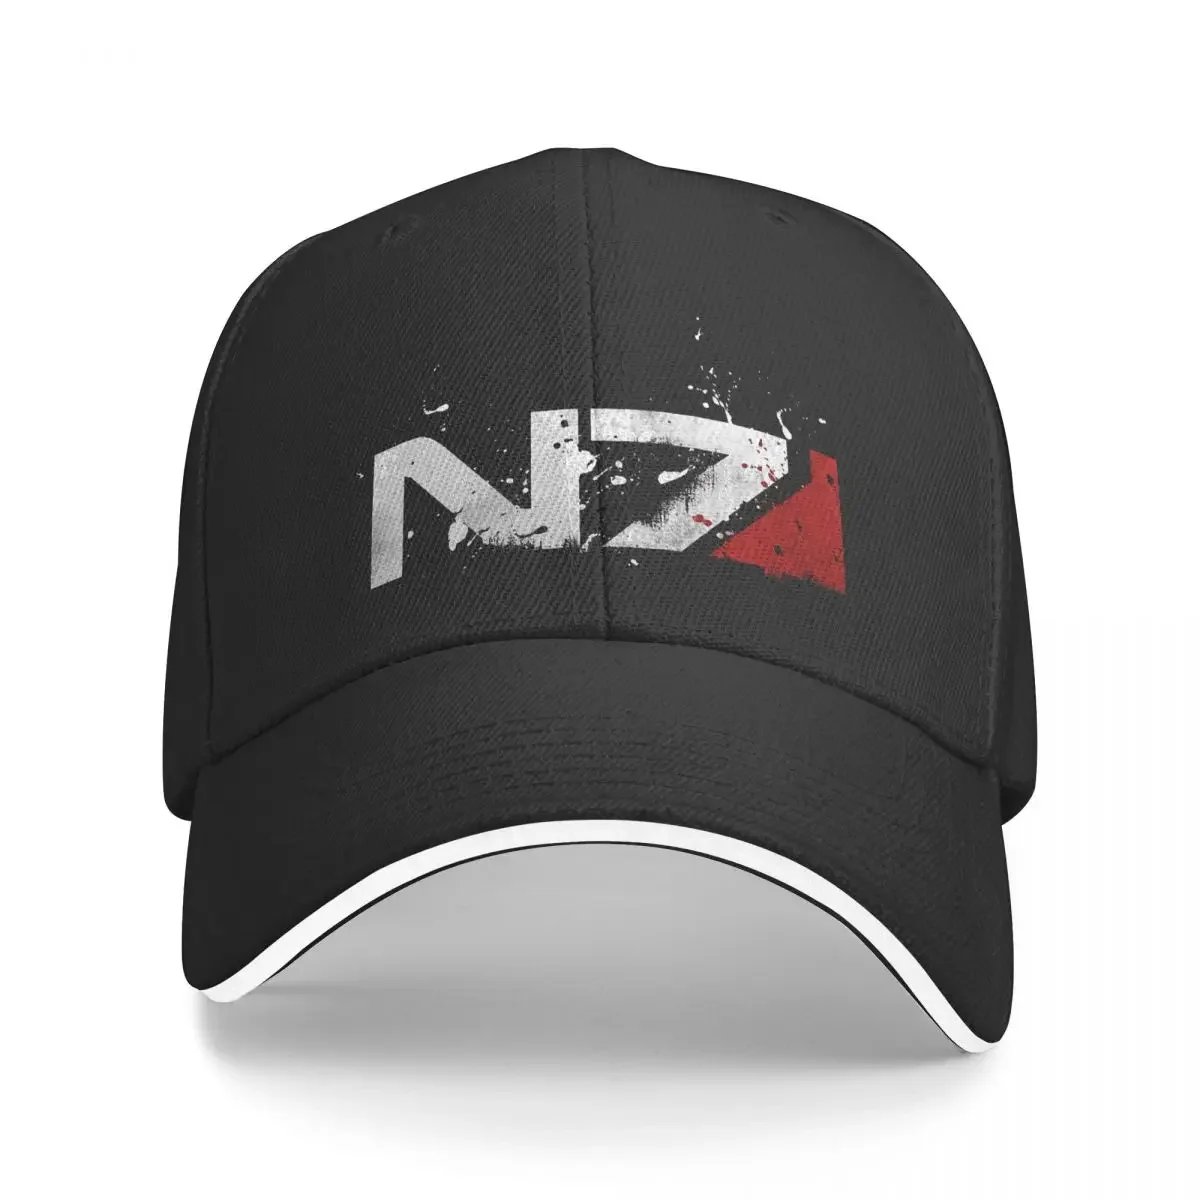 

Distressed N7 Mass Effect Game Multicolor Hat Peaked Women's Cap Personalized Visor Outdoor Hats